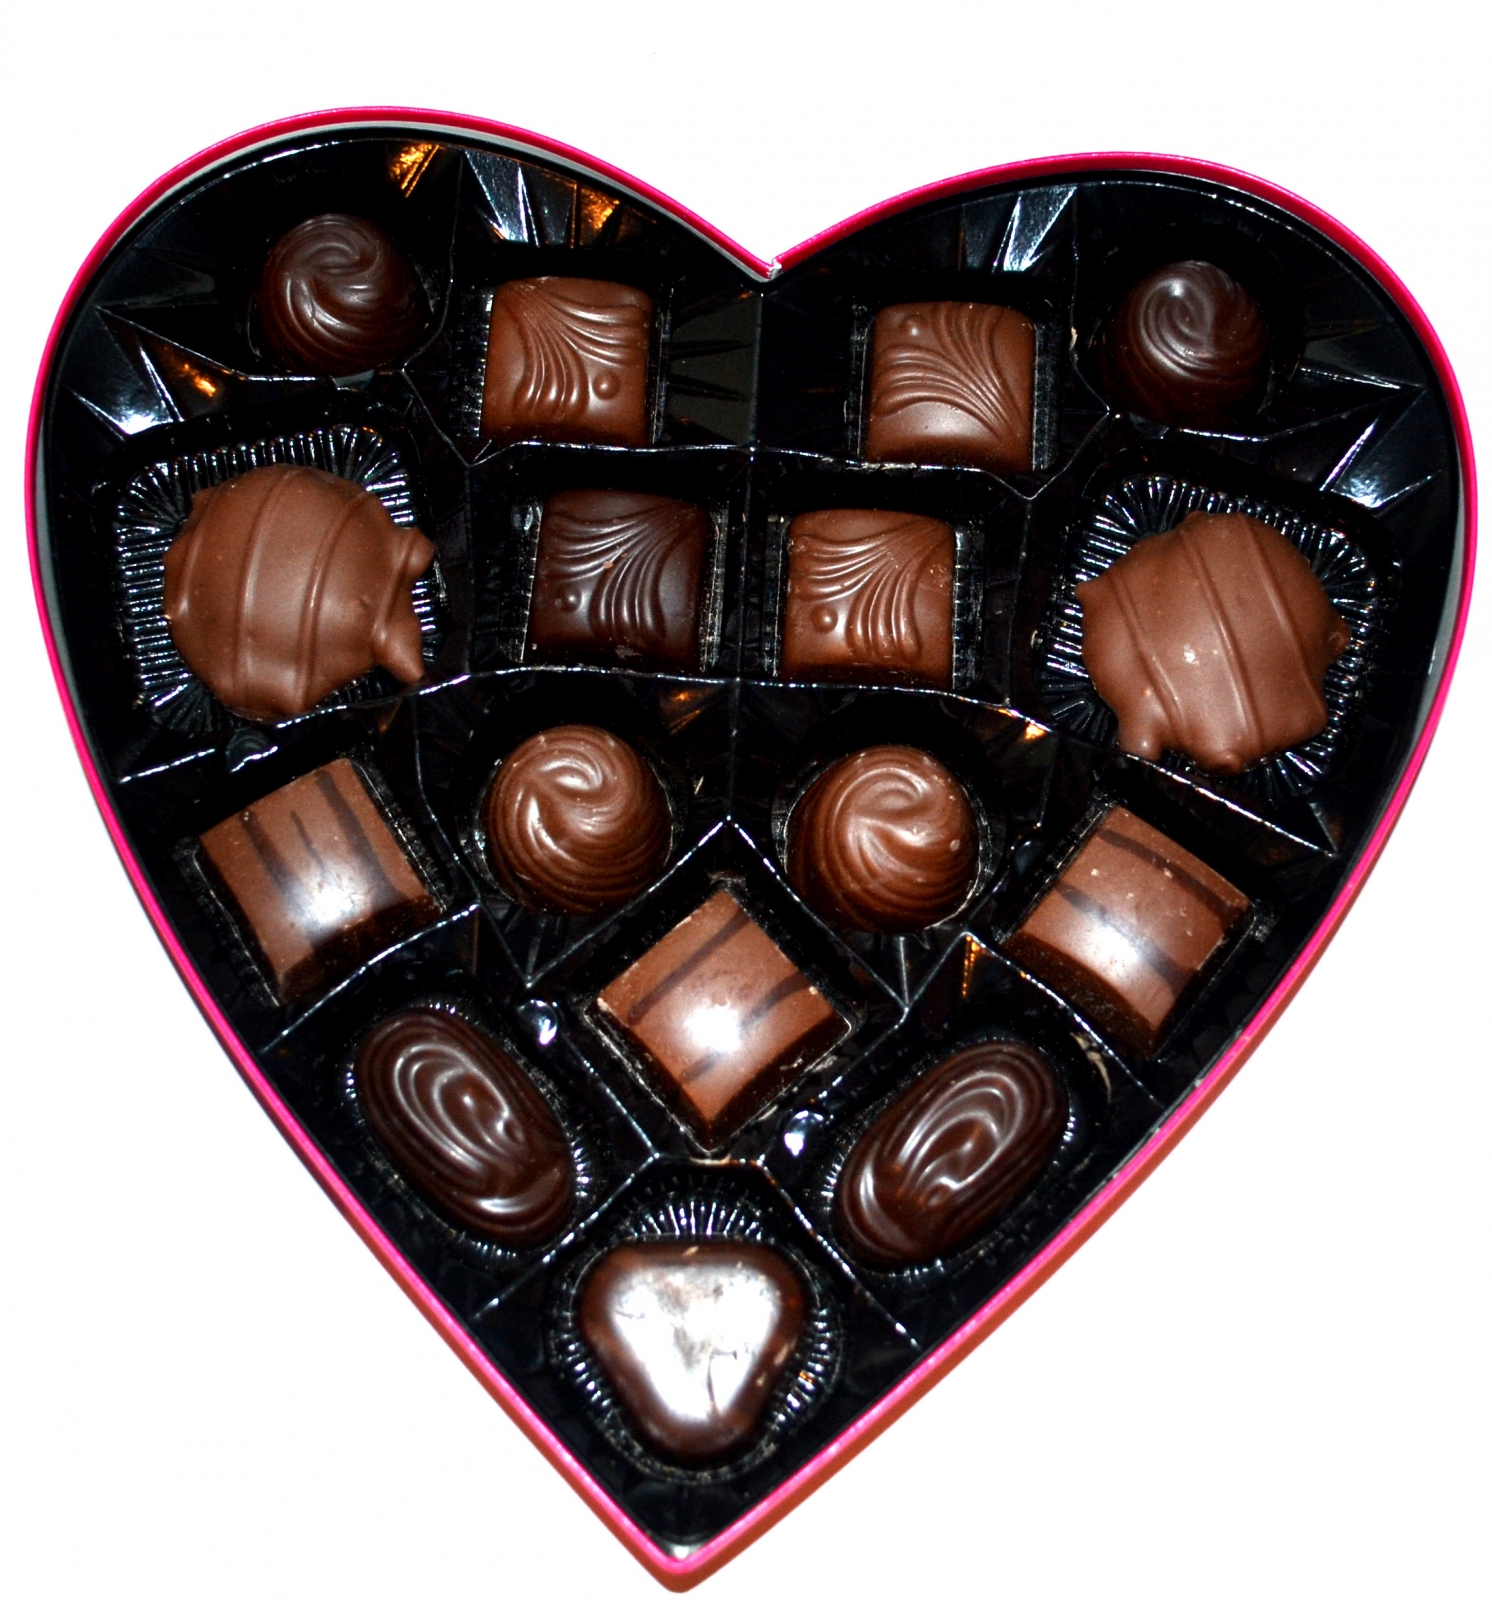 9. Valentine Day Chocolate Hd Wallpaper | Chocolate Pictures And Photos